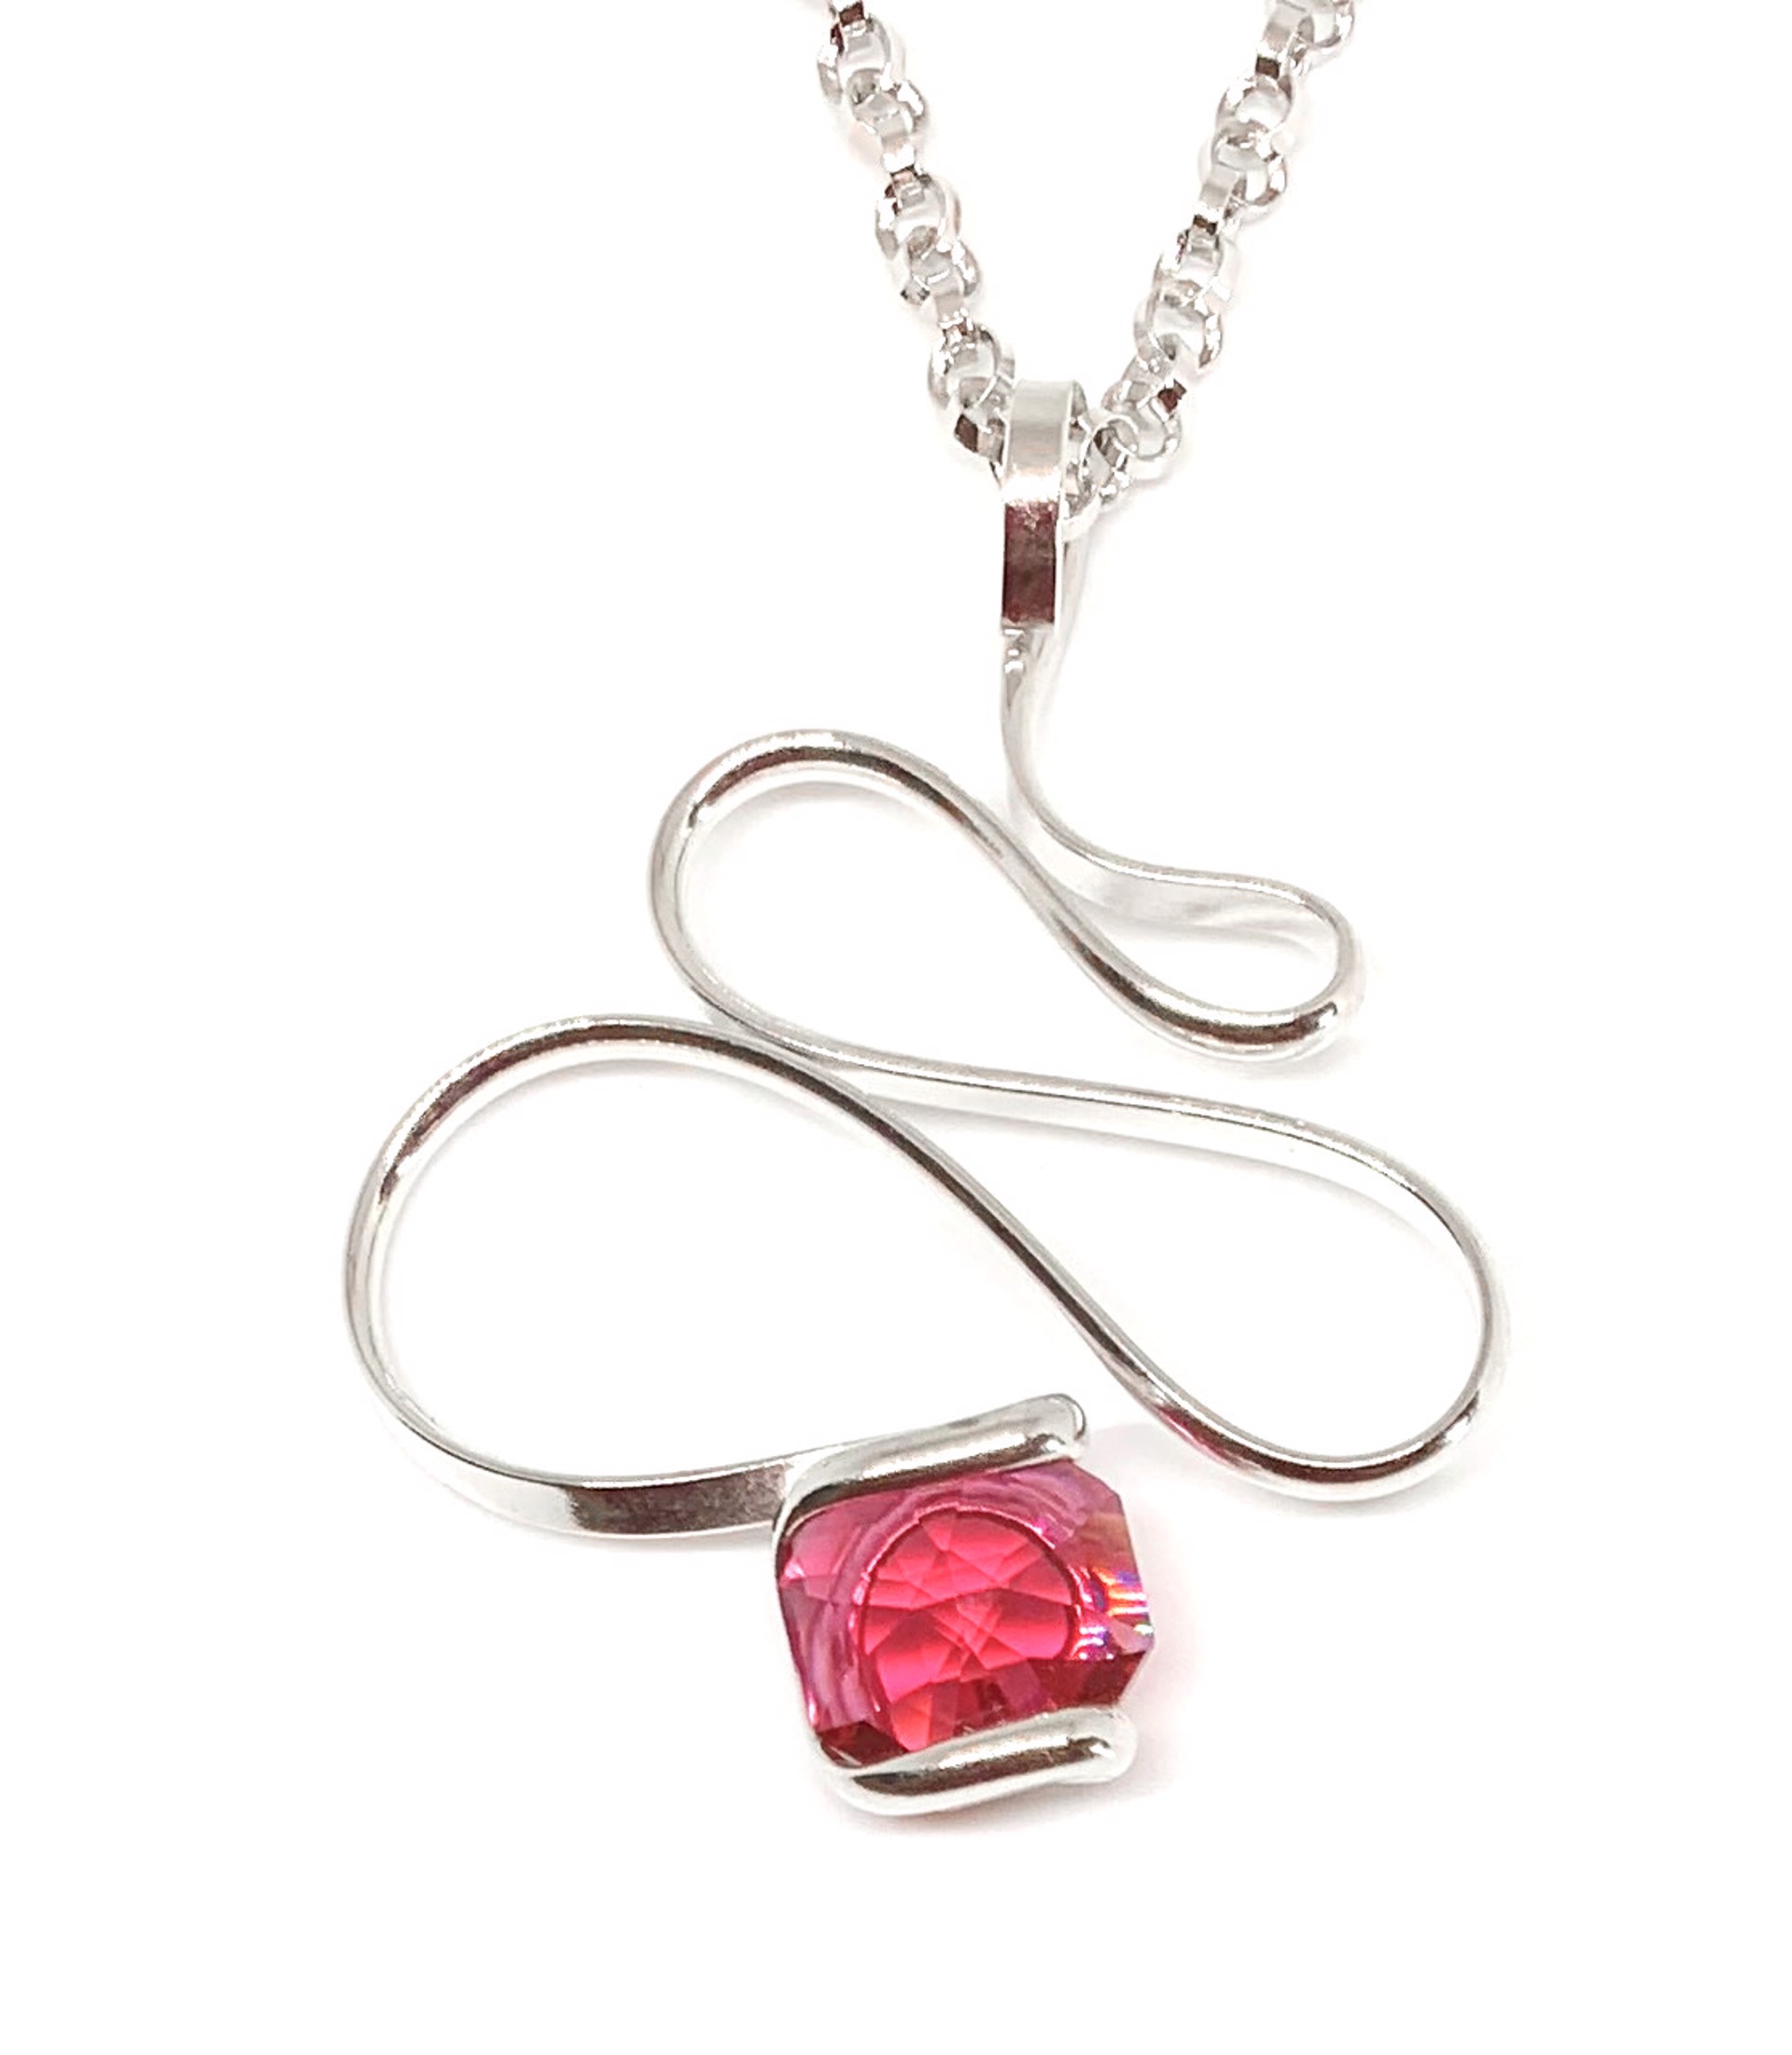 Bordeaux Red Swarovski Crystal Pendant - Handmade Triple Rhodium Plated - Chain Available by Monique Touber